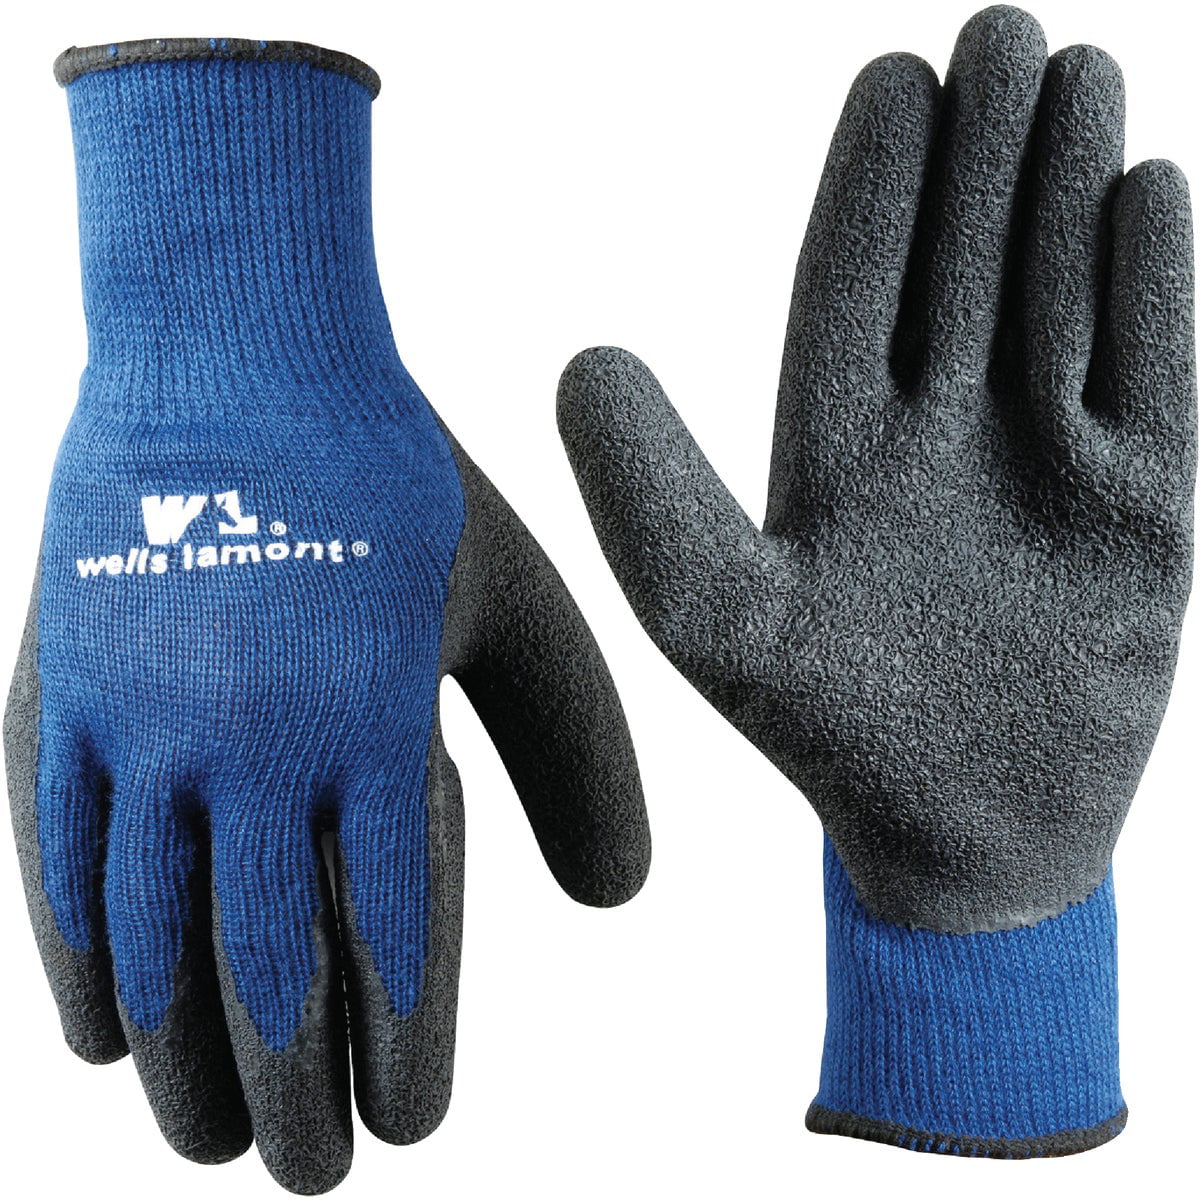 Wells Lamont 7647XL Synthetic Leather High Dexterity Gripper Work Gloves Extra Large